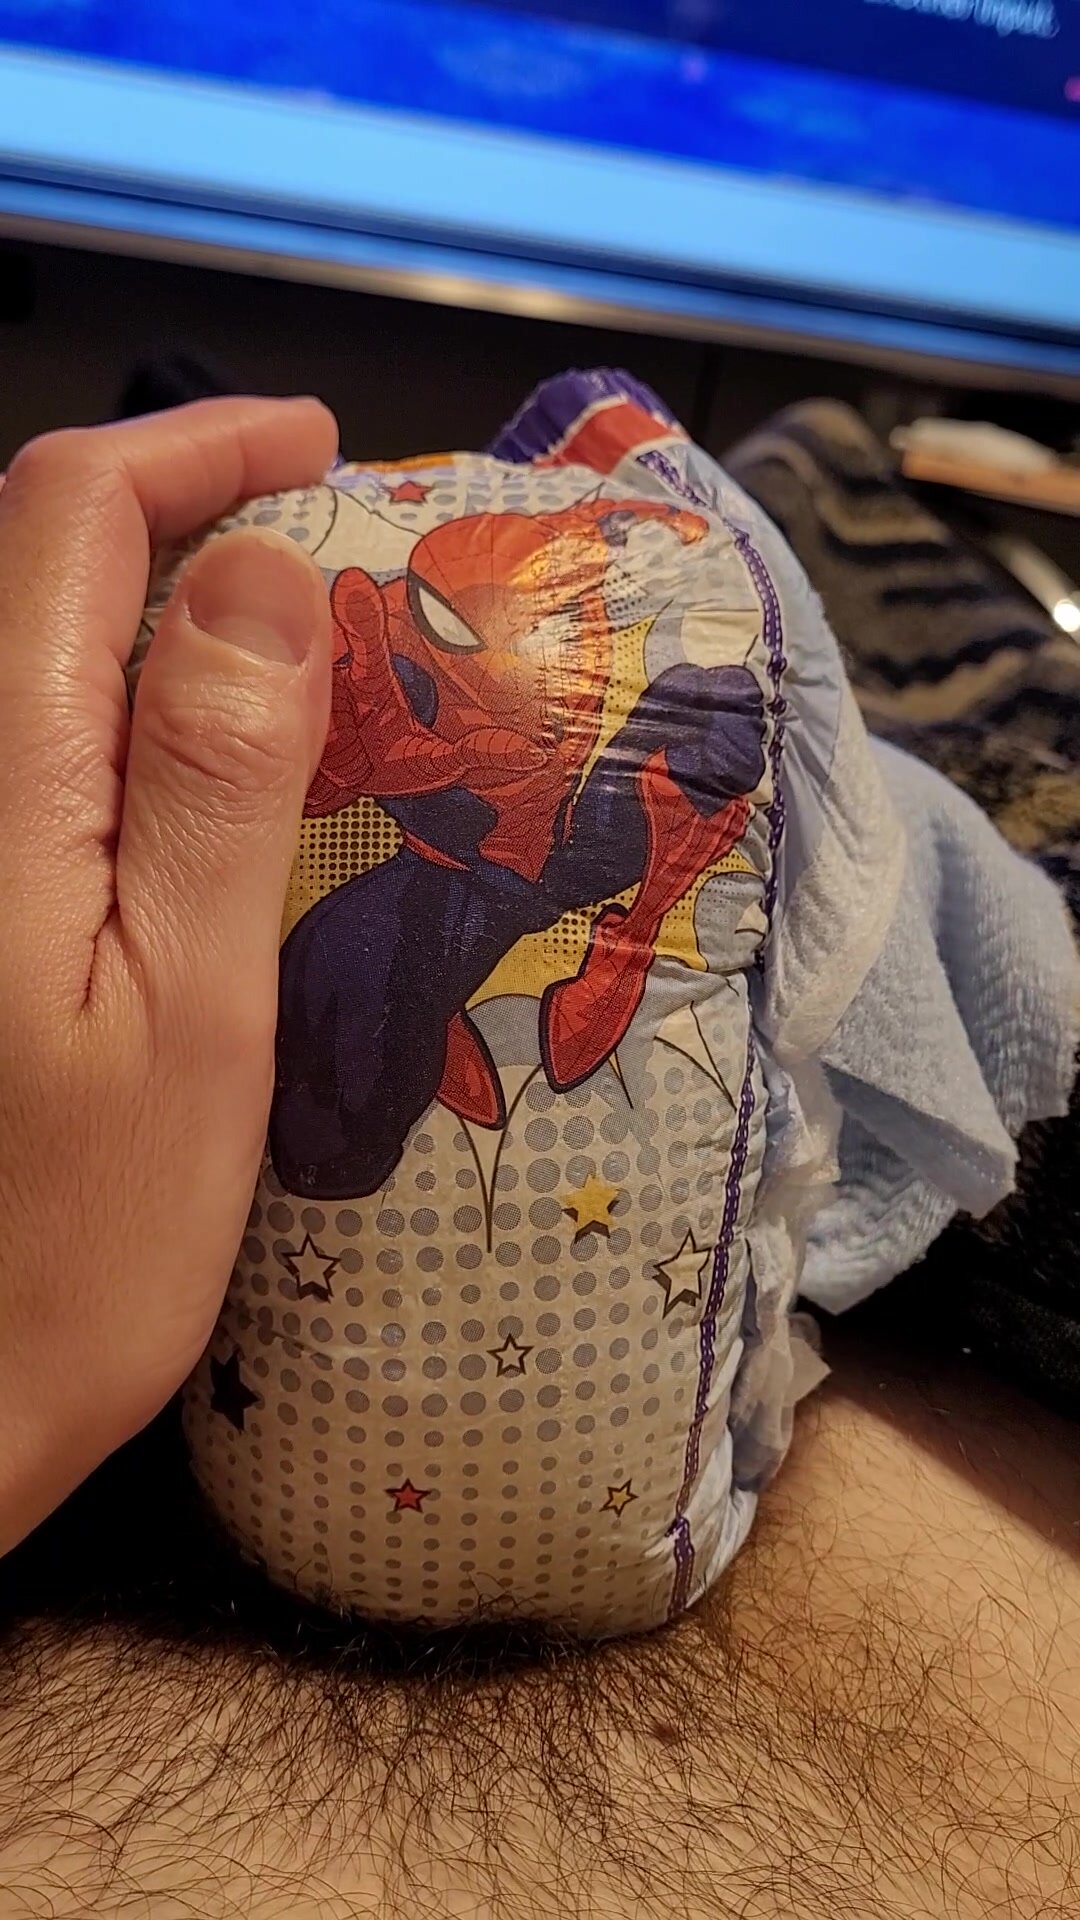 Edging inside of this sexy Spider-Man goodnite